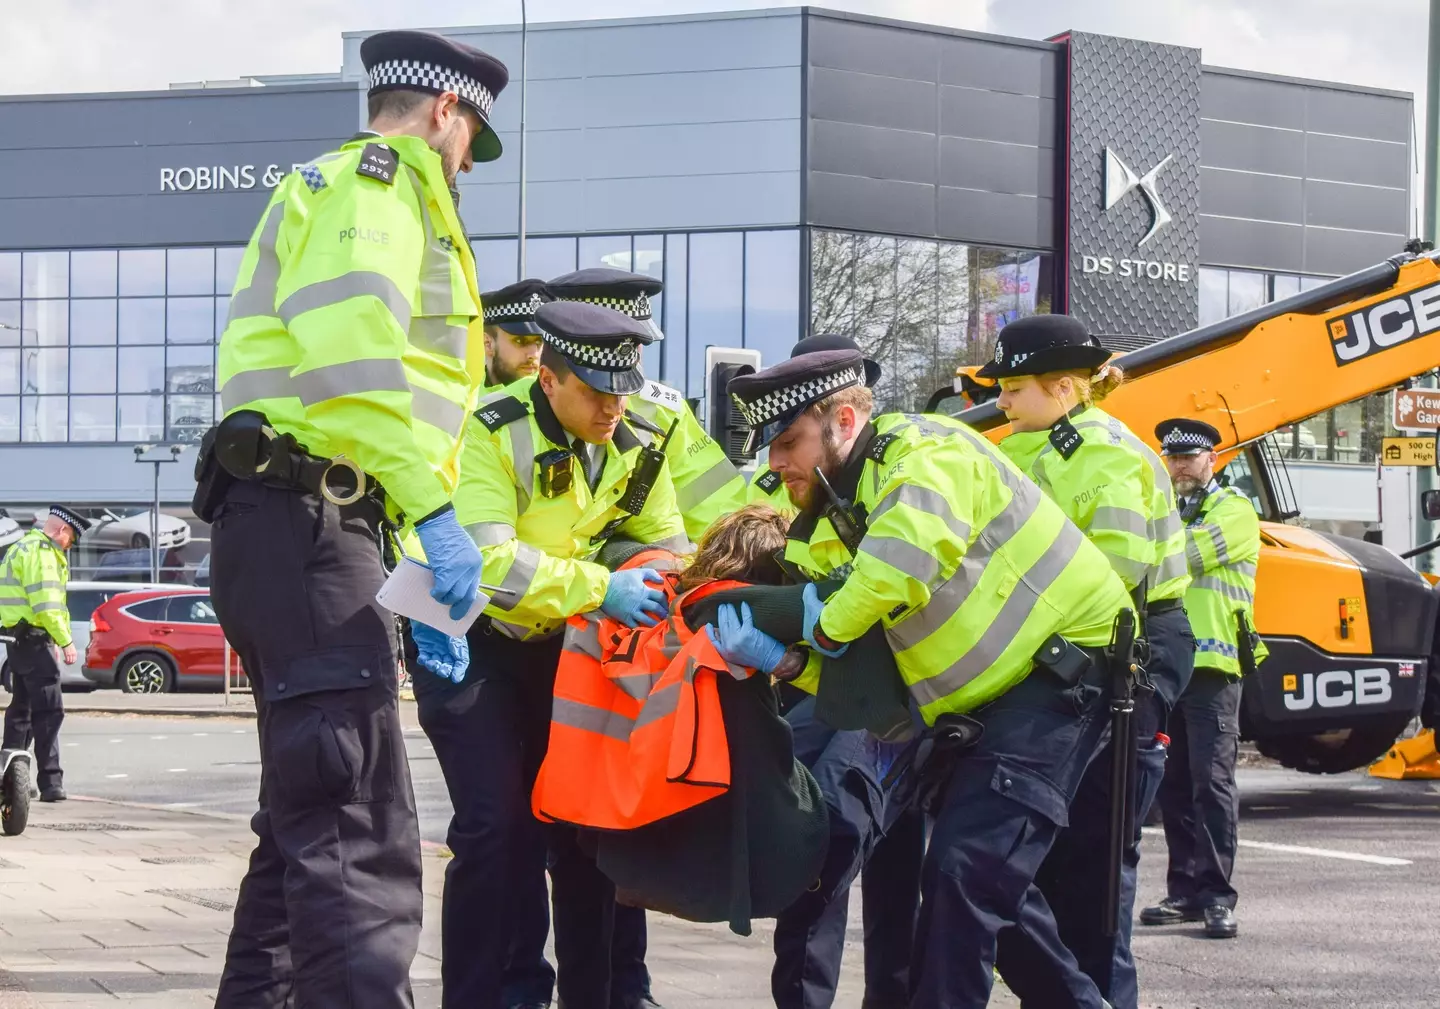 Police are to be given extra powers to tackle 'disruptive' protests.